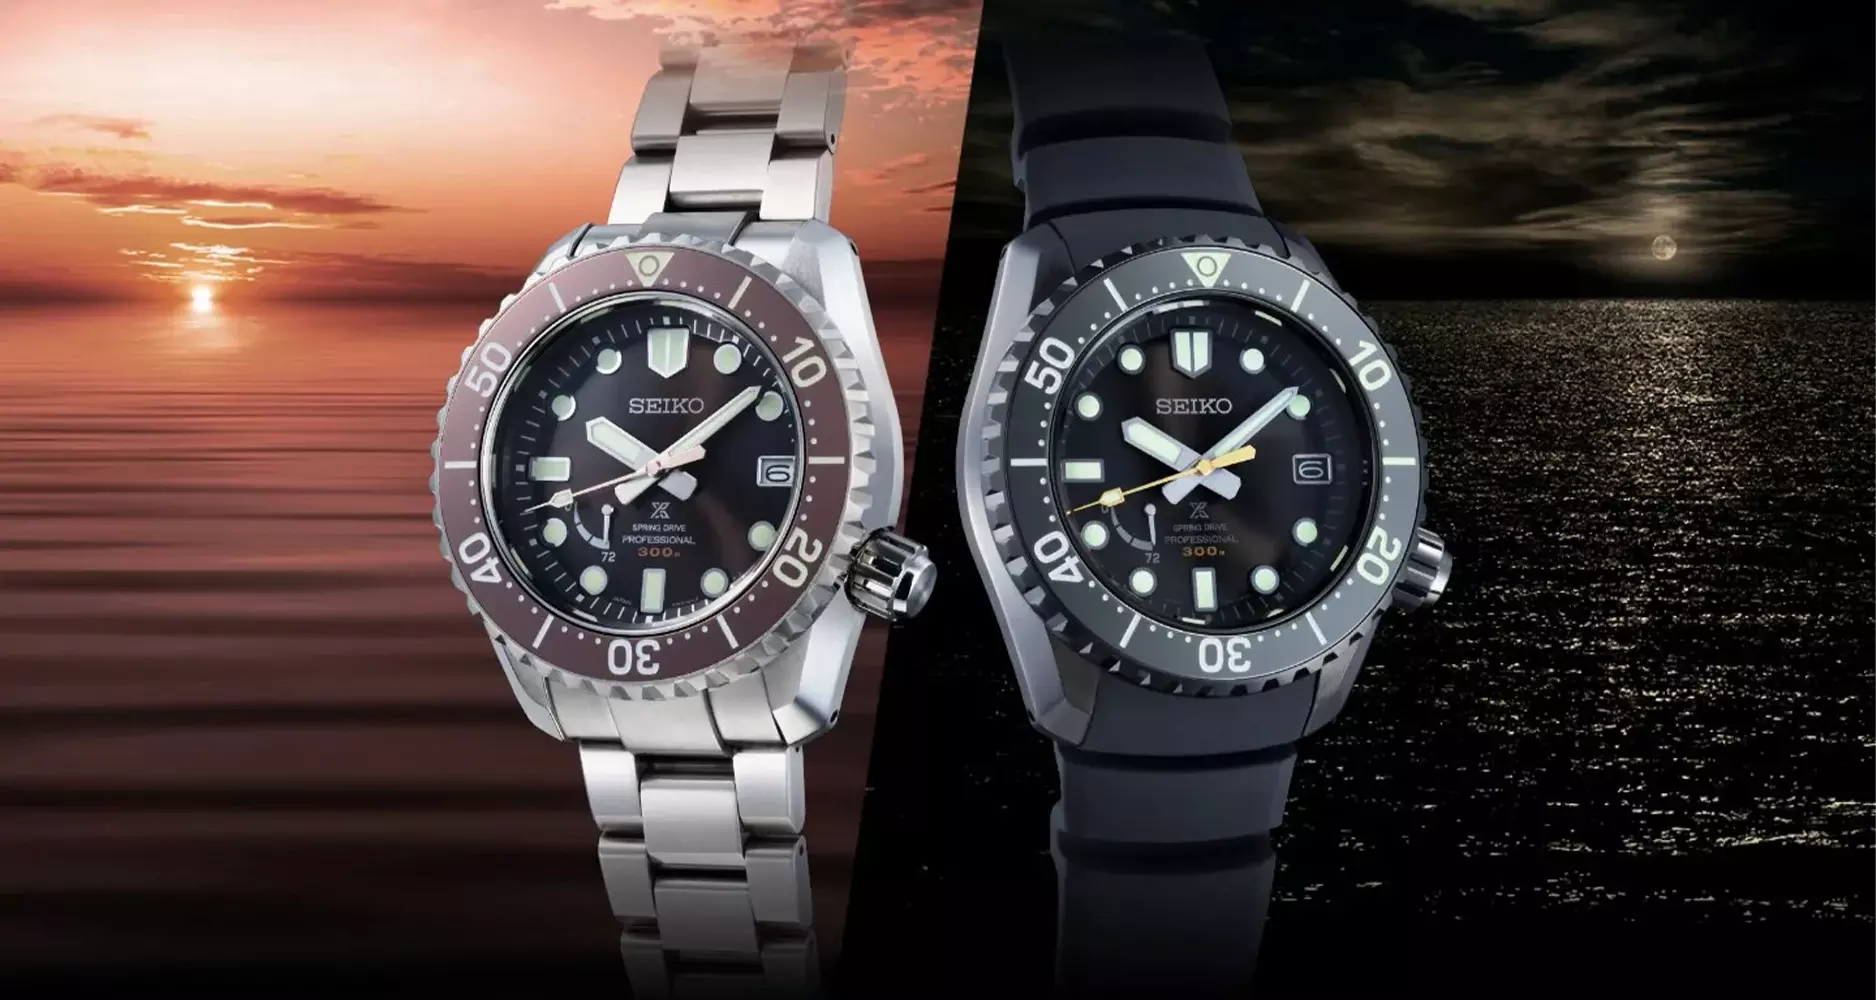 Examples of Seiko's Prospex LX collection.